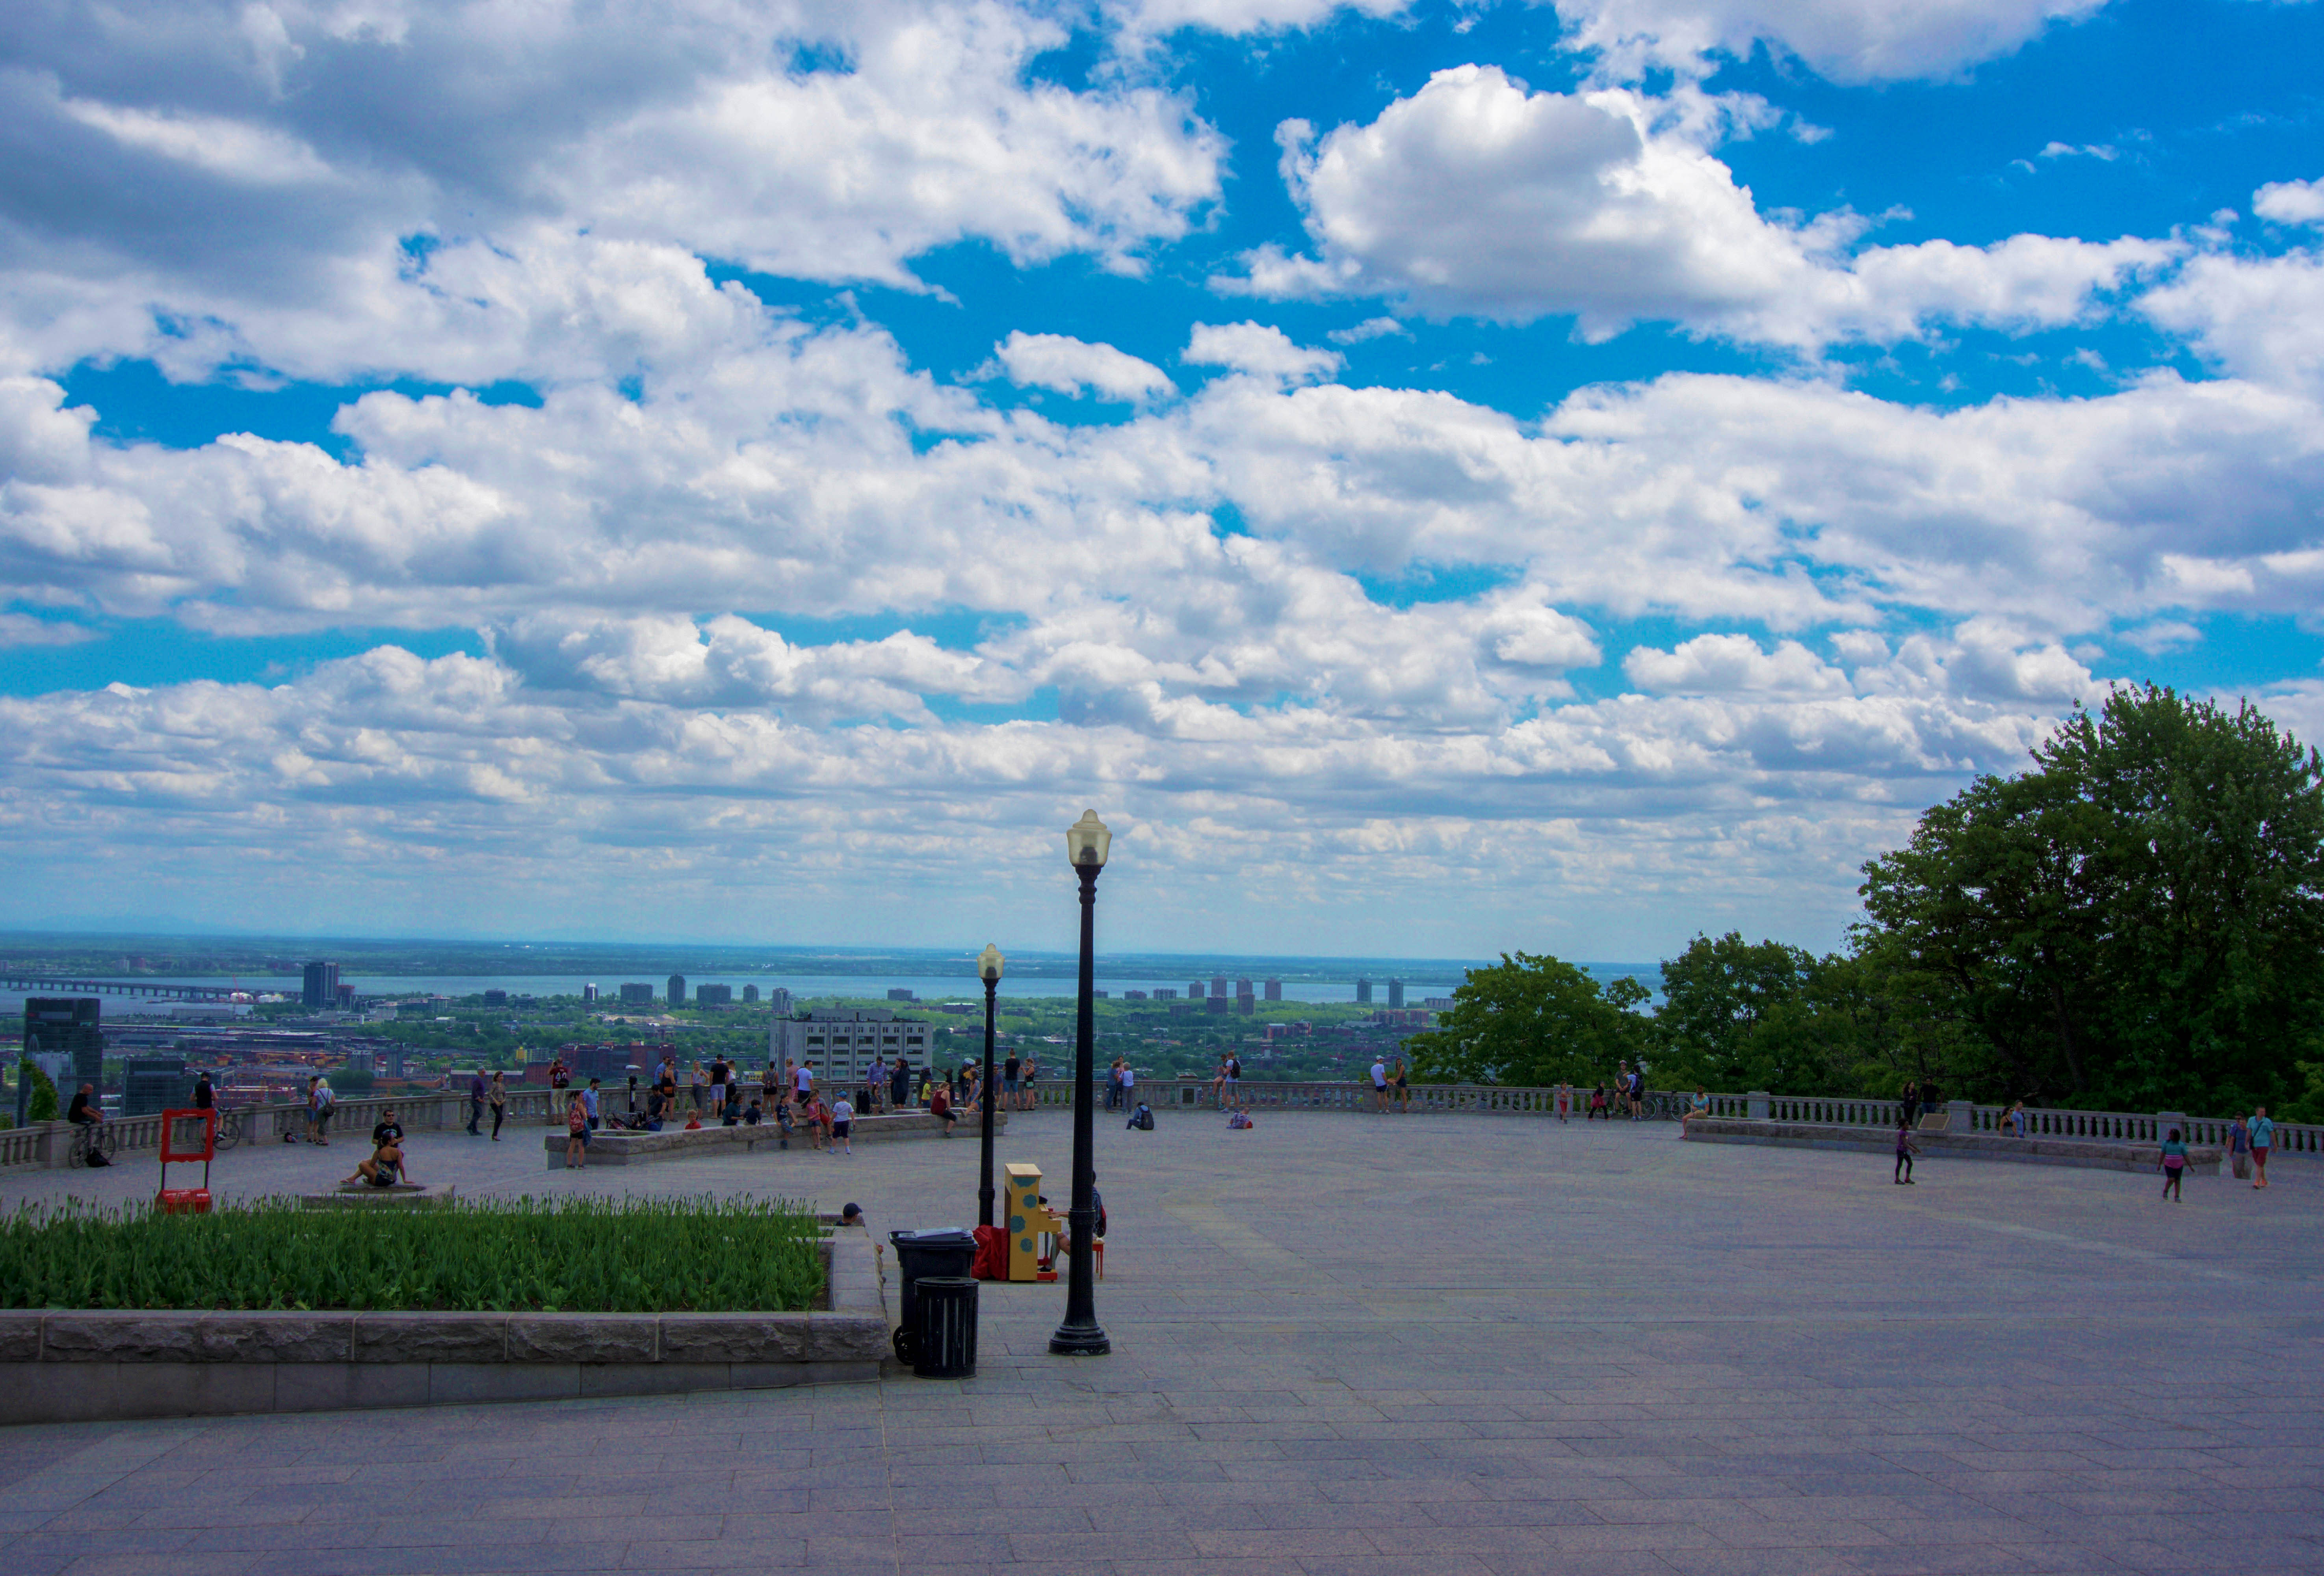 Made it to the top of Mount Royal